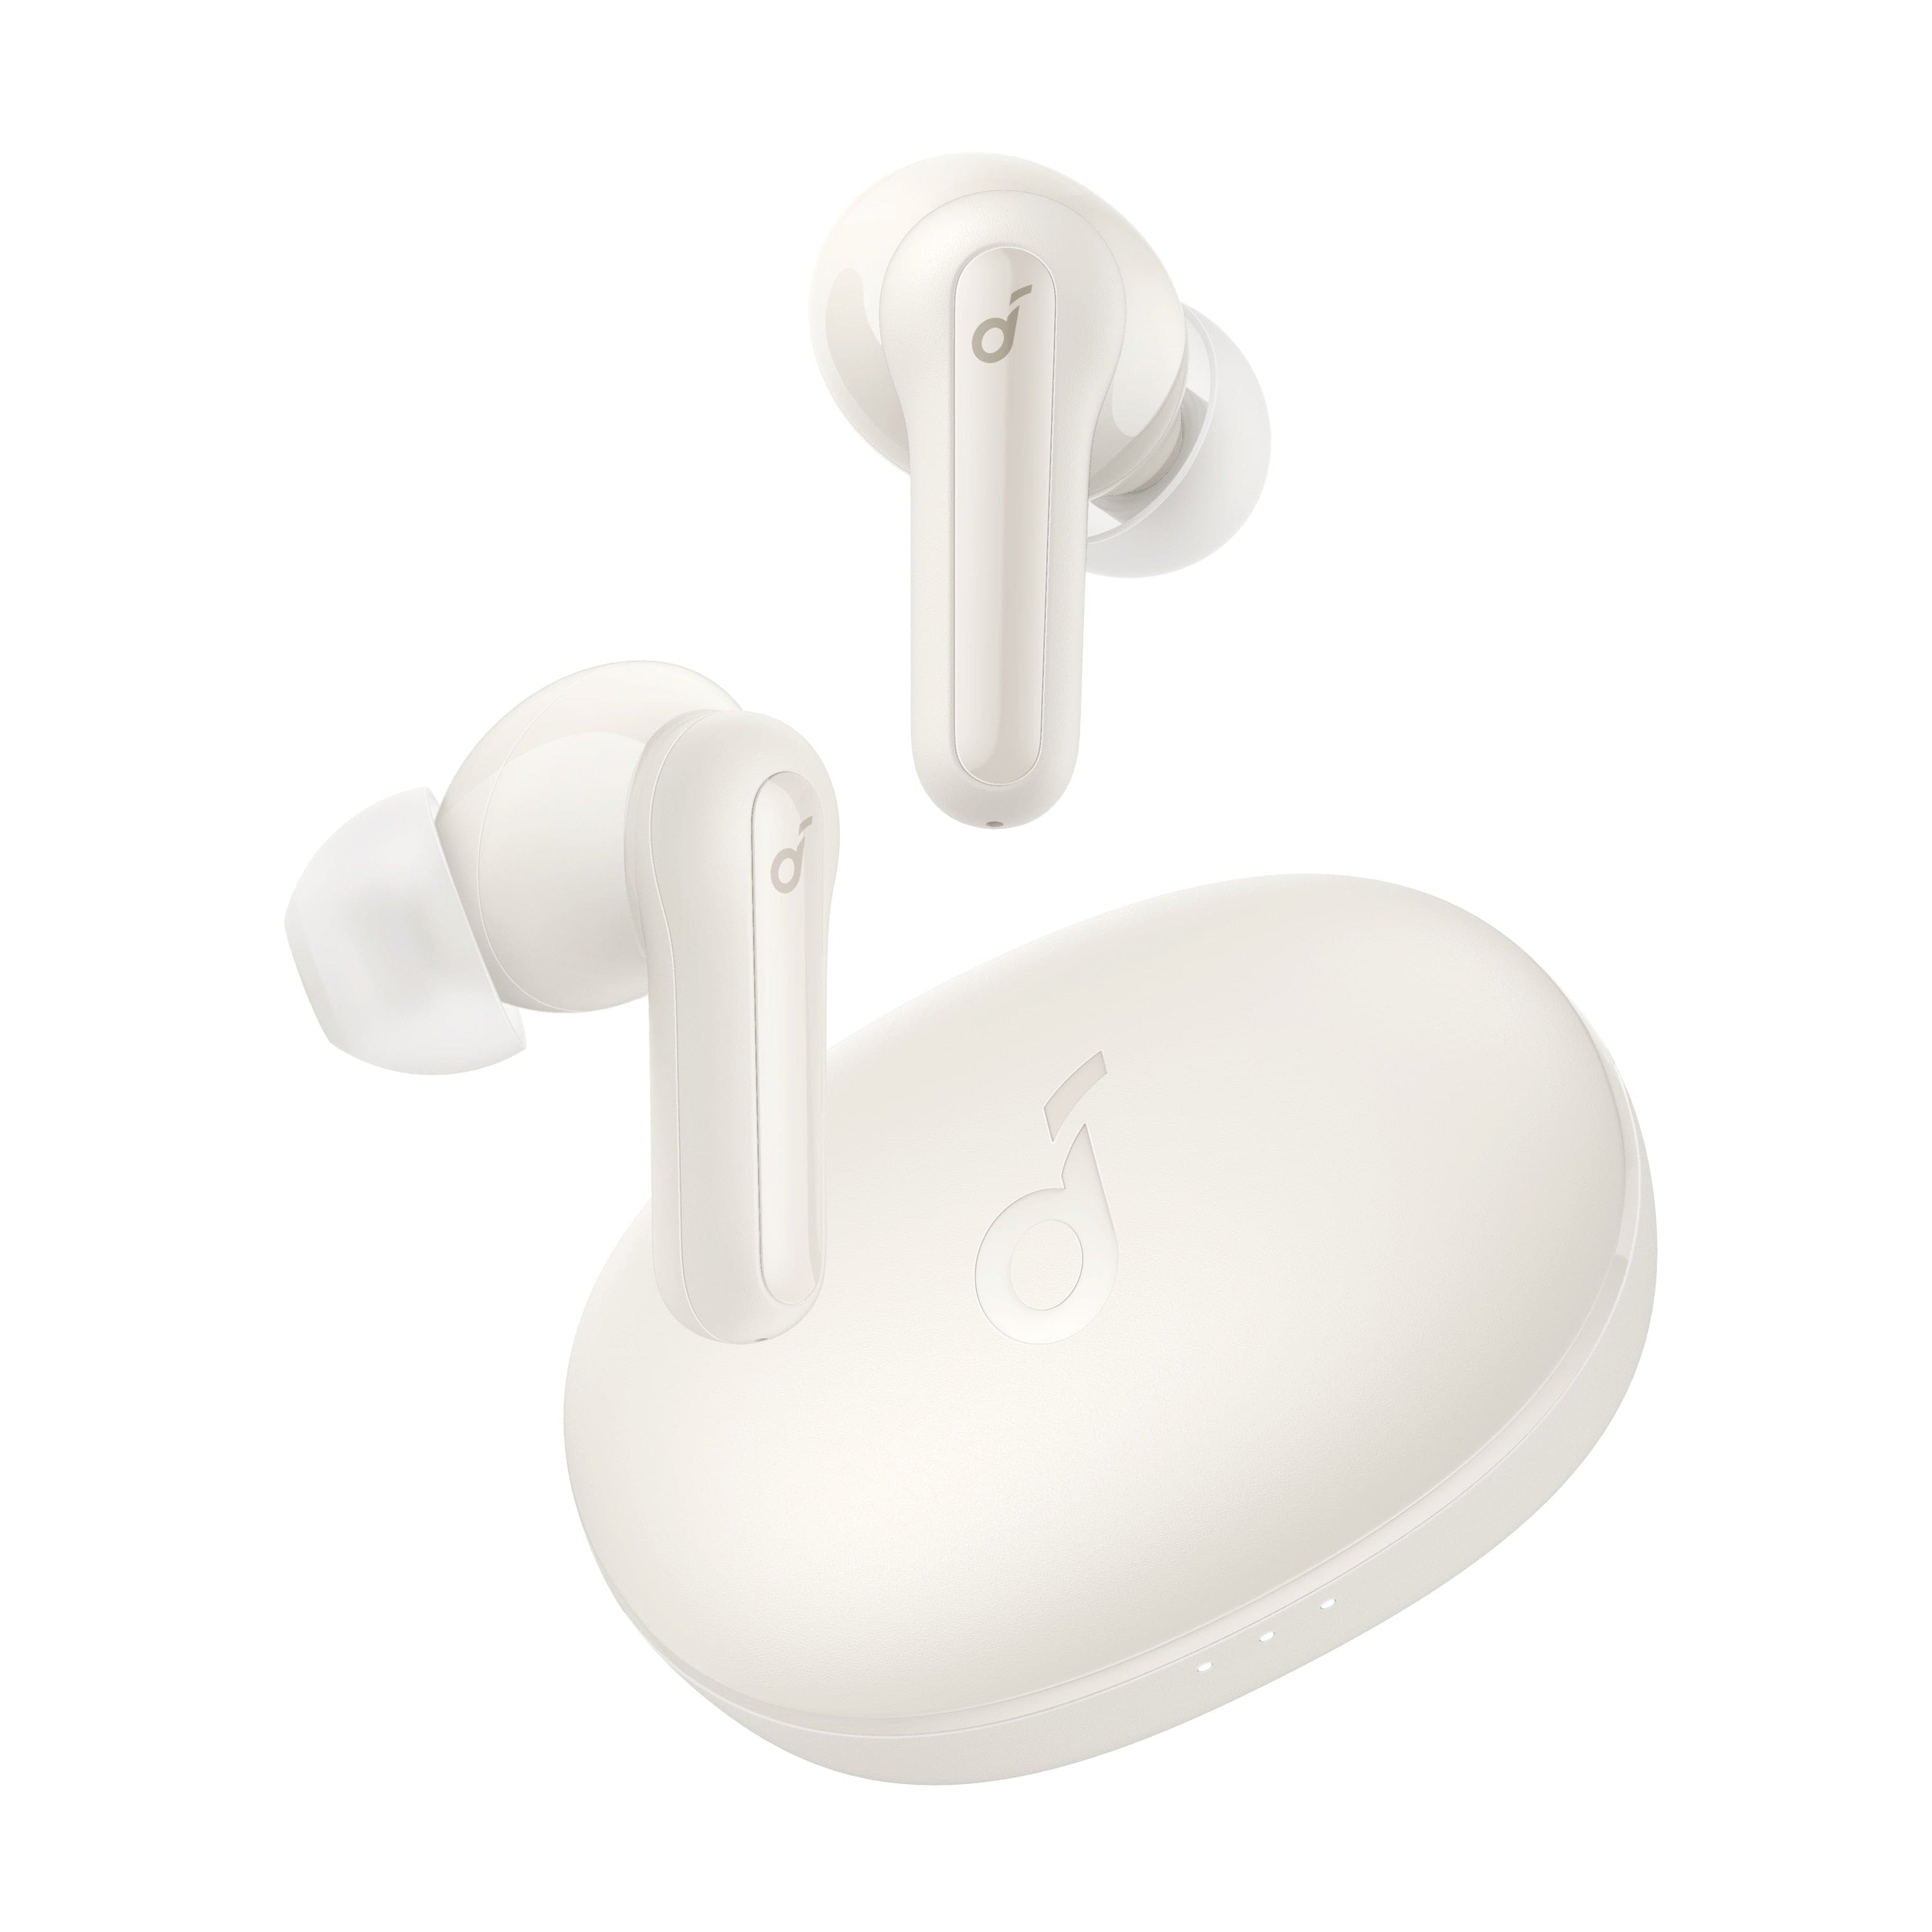 Soundcore Soundcore, Wireless Earbuds, Version Life P2 Mini True, Supports Bluetooth 5.2, Playtime up to 32 Hours, Color White